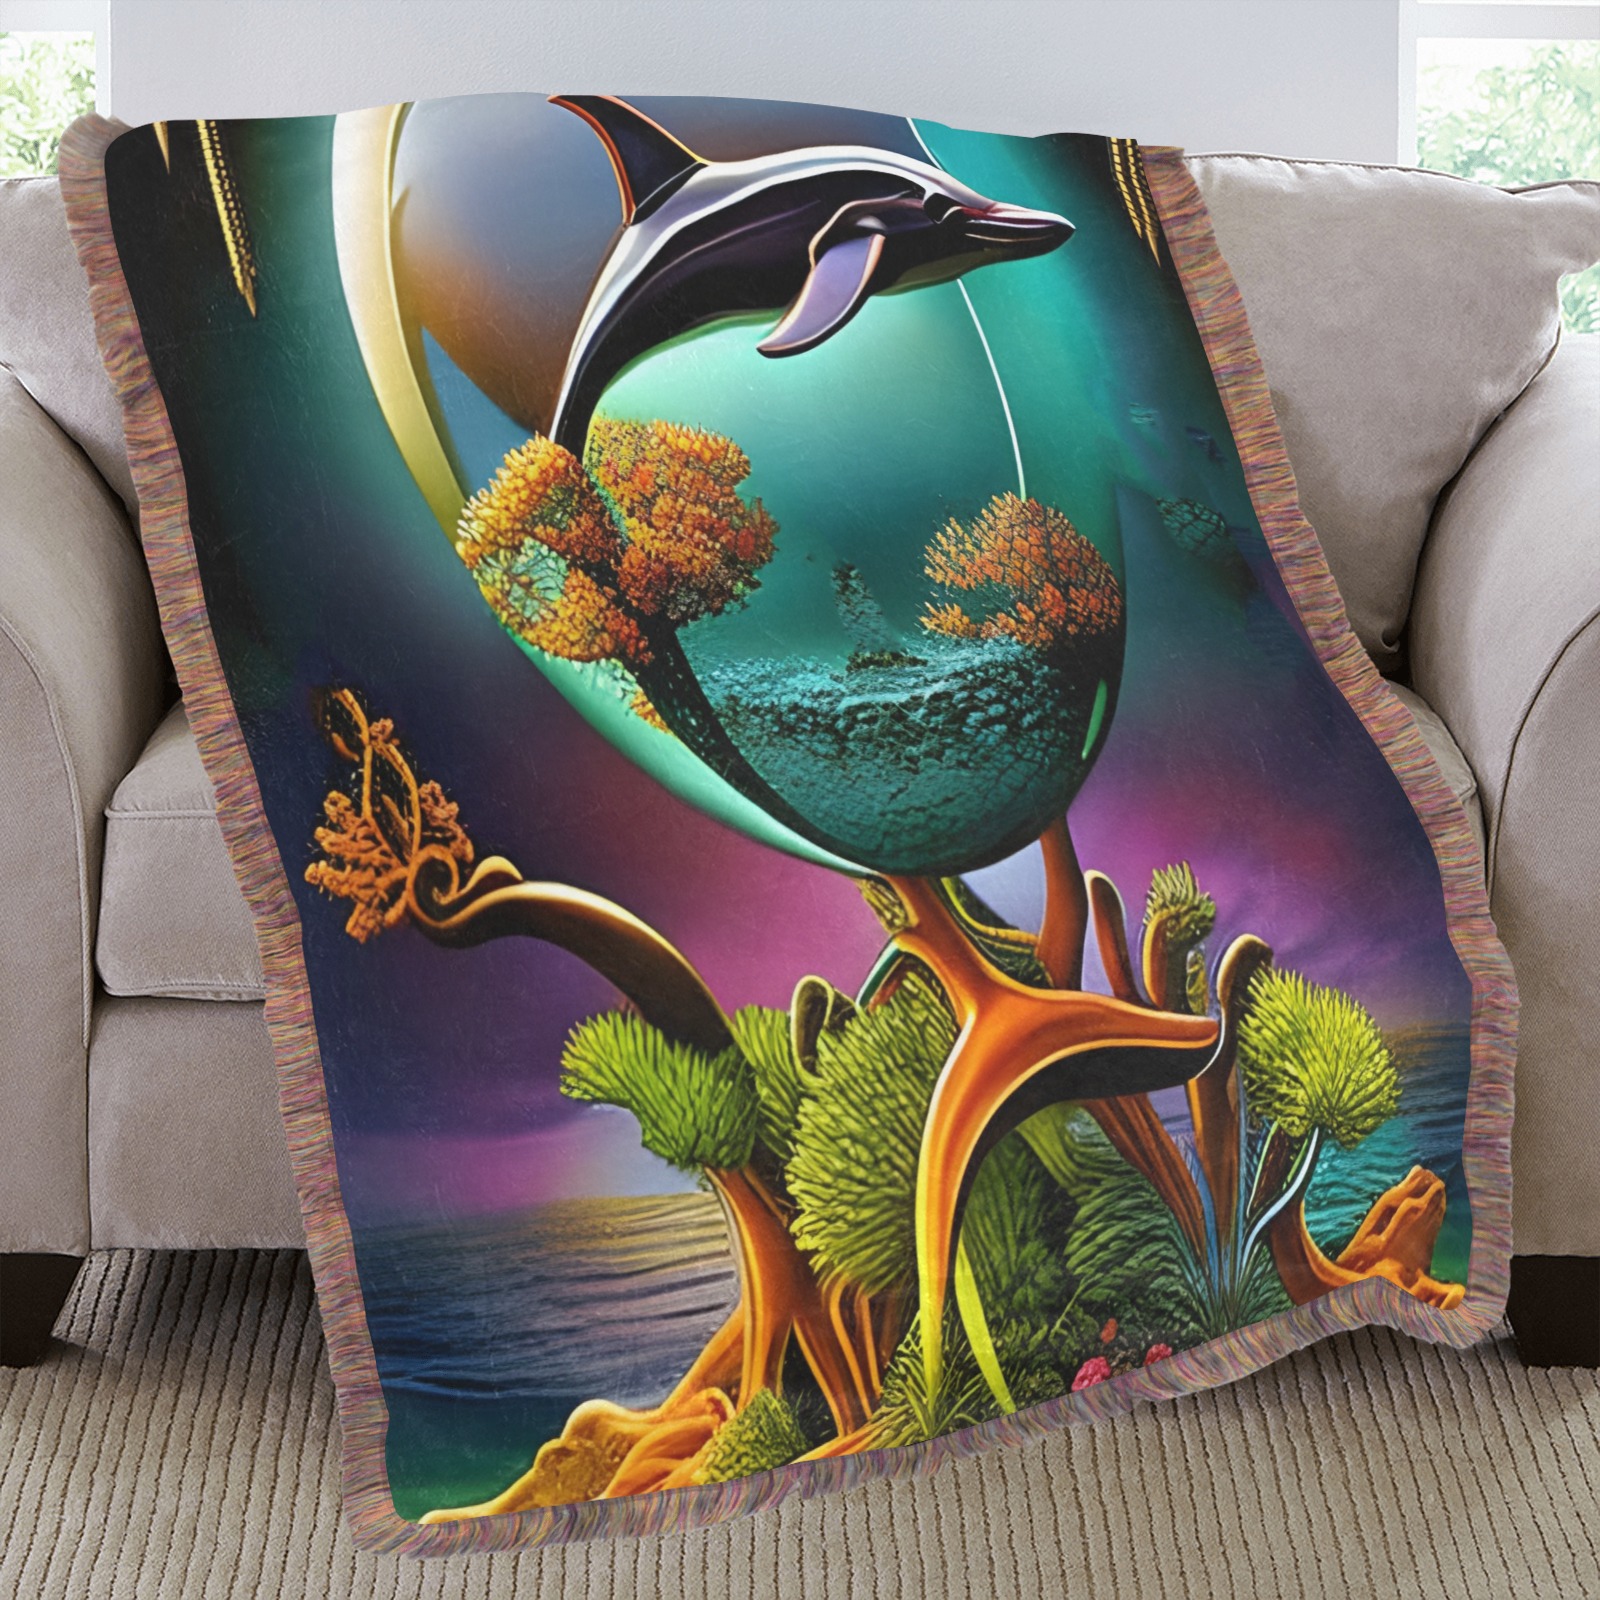 Out Of This World Spheres Dolphin Ultra-Soft Fringe Blanket 50"x60" (Mixed Green)